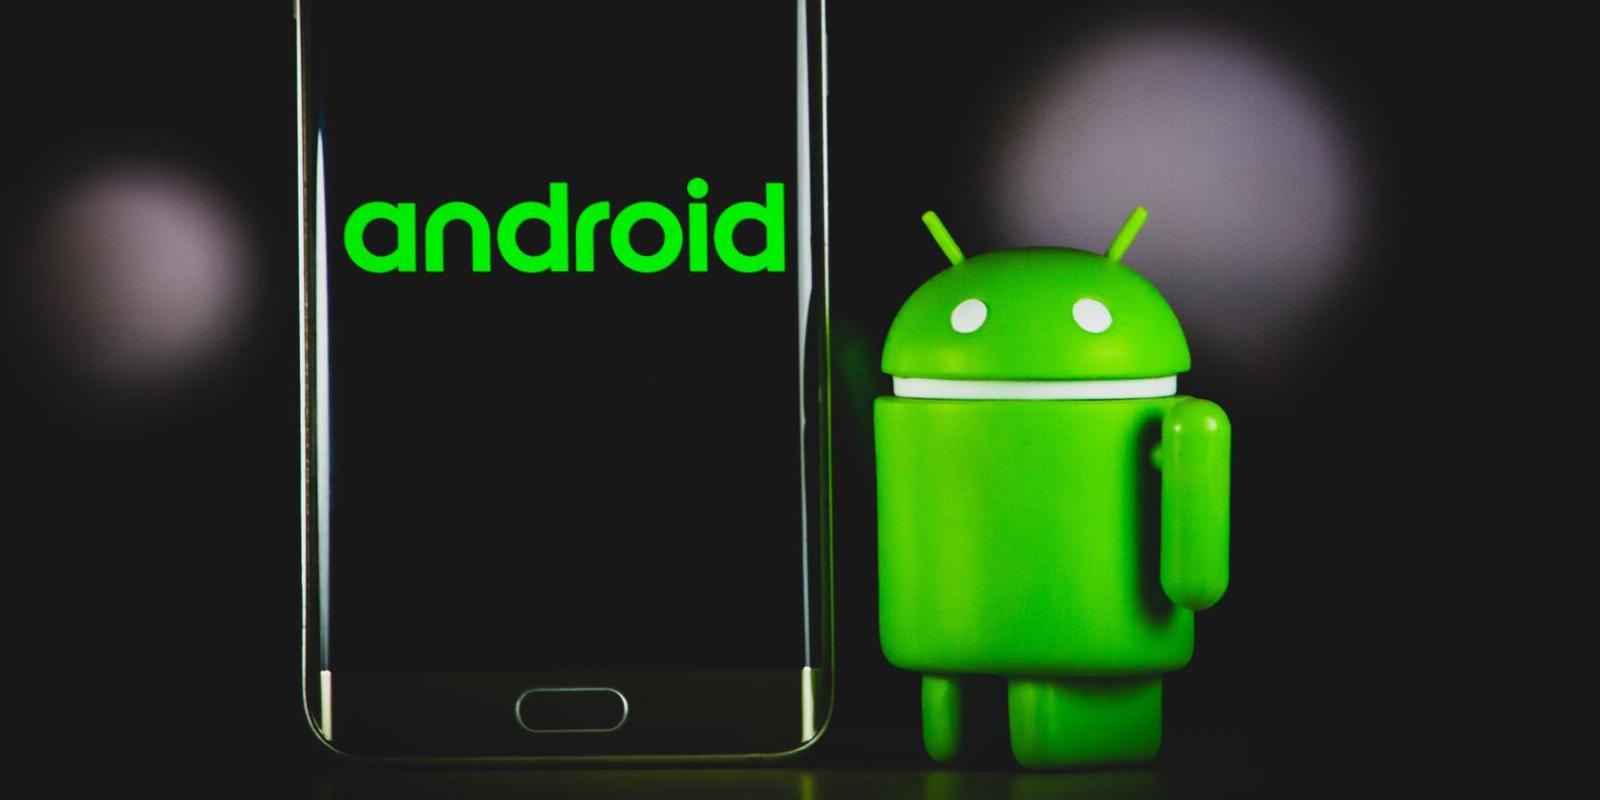 How to Flash a GSI on an Android Device